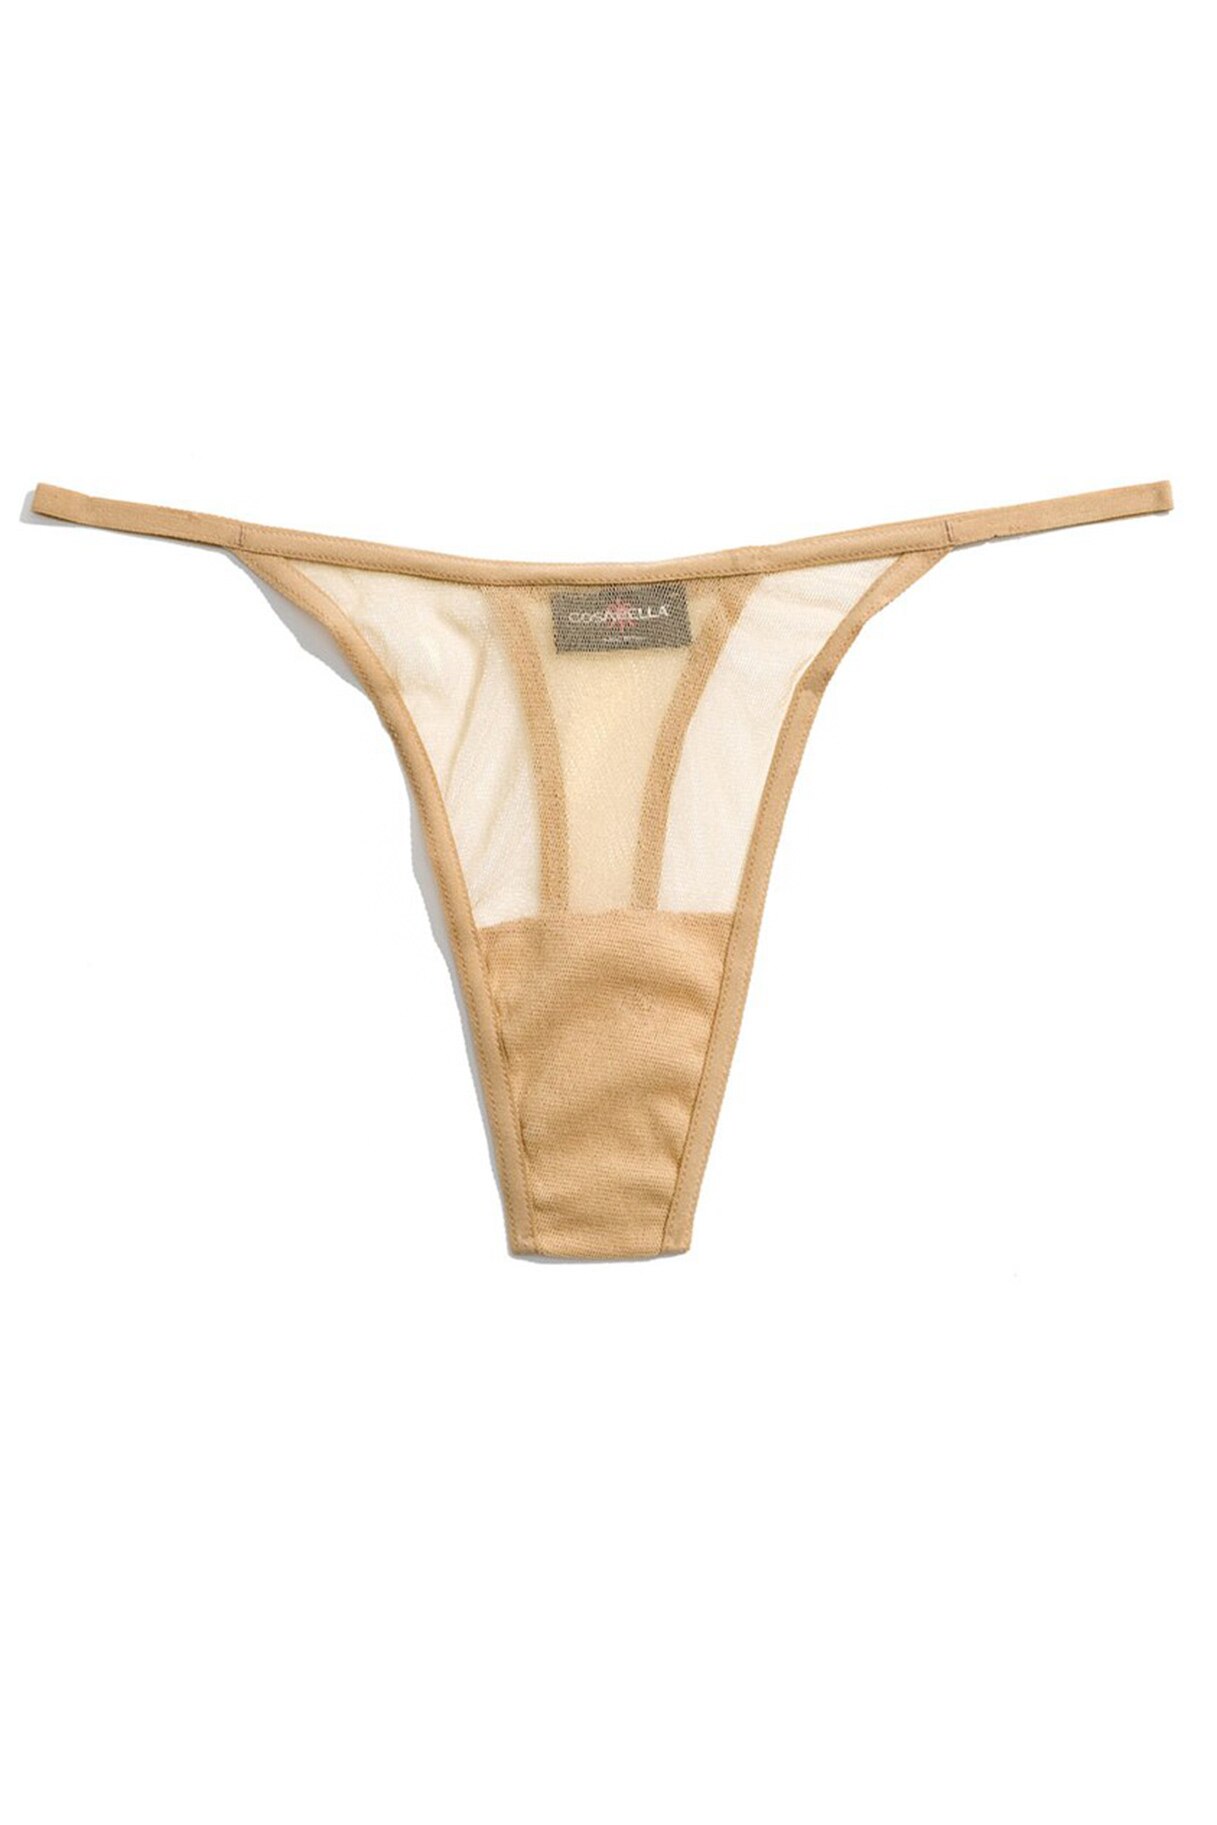 Avoid Panty Lines with Undetectable Underwear | Most Wanted